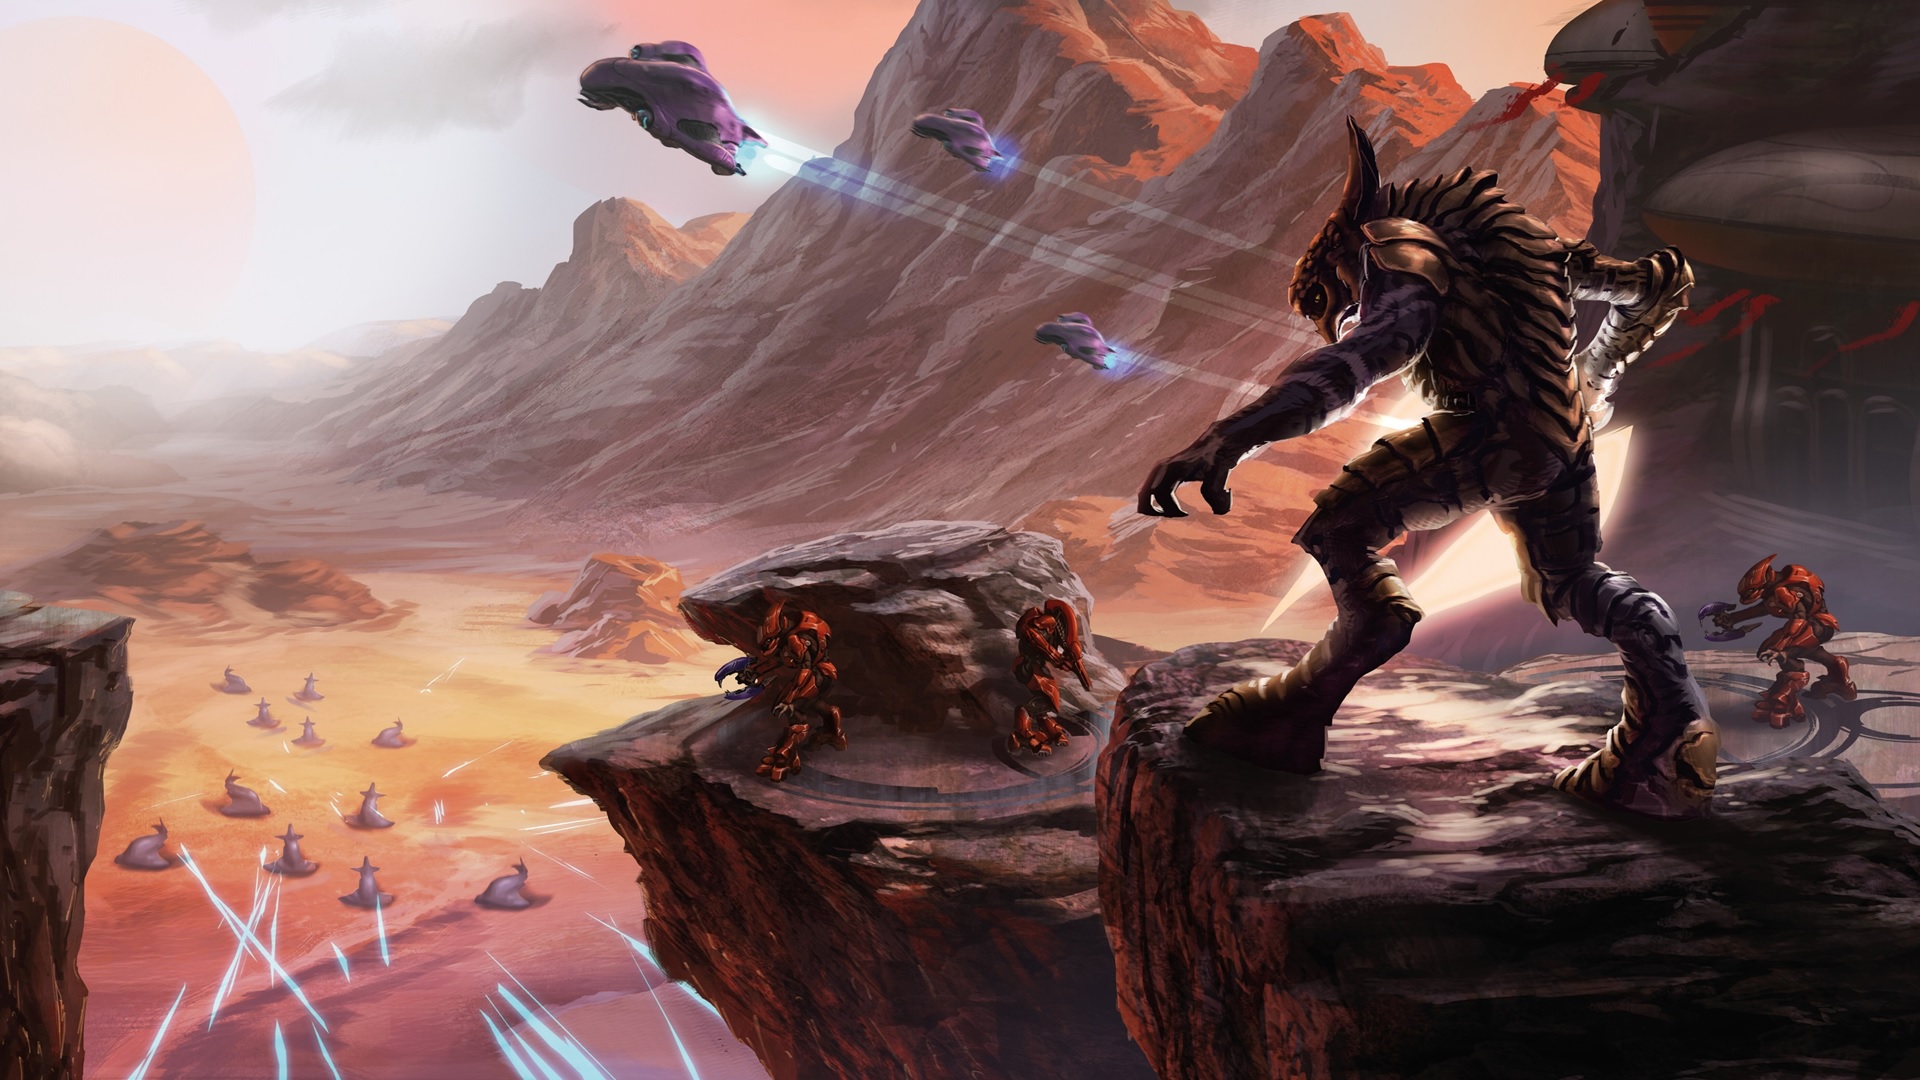 Halo Mythos artwork by Isaac Hannaford depicting Arbiter Thel 'Vadam on Sanghelios during the Blooding Years